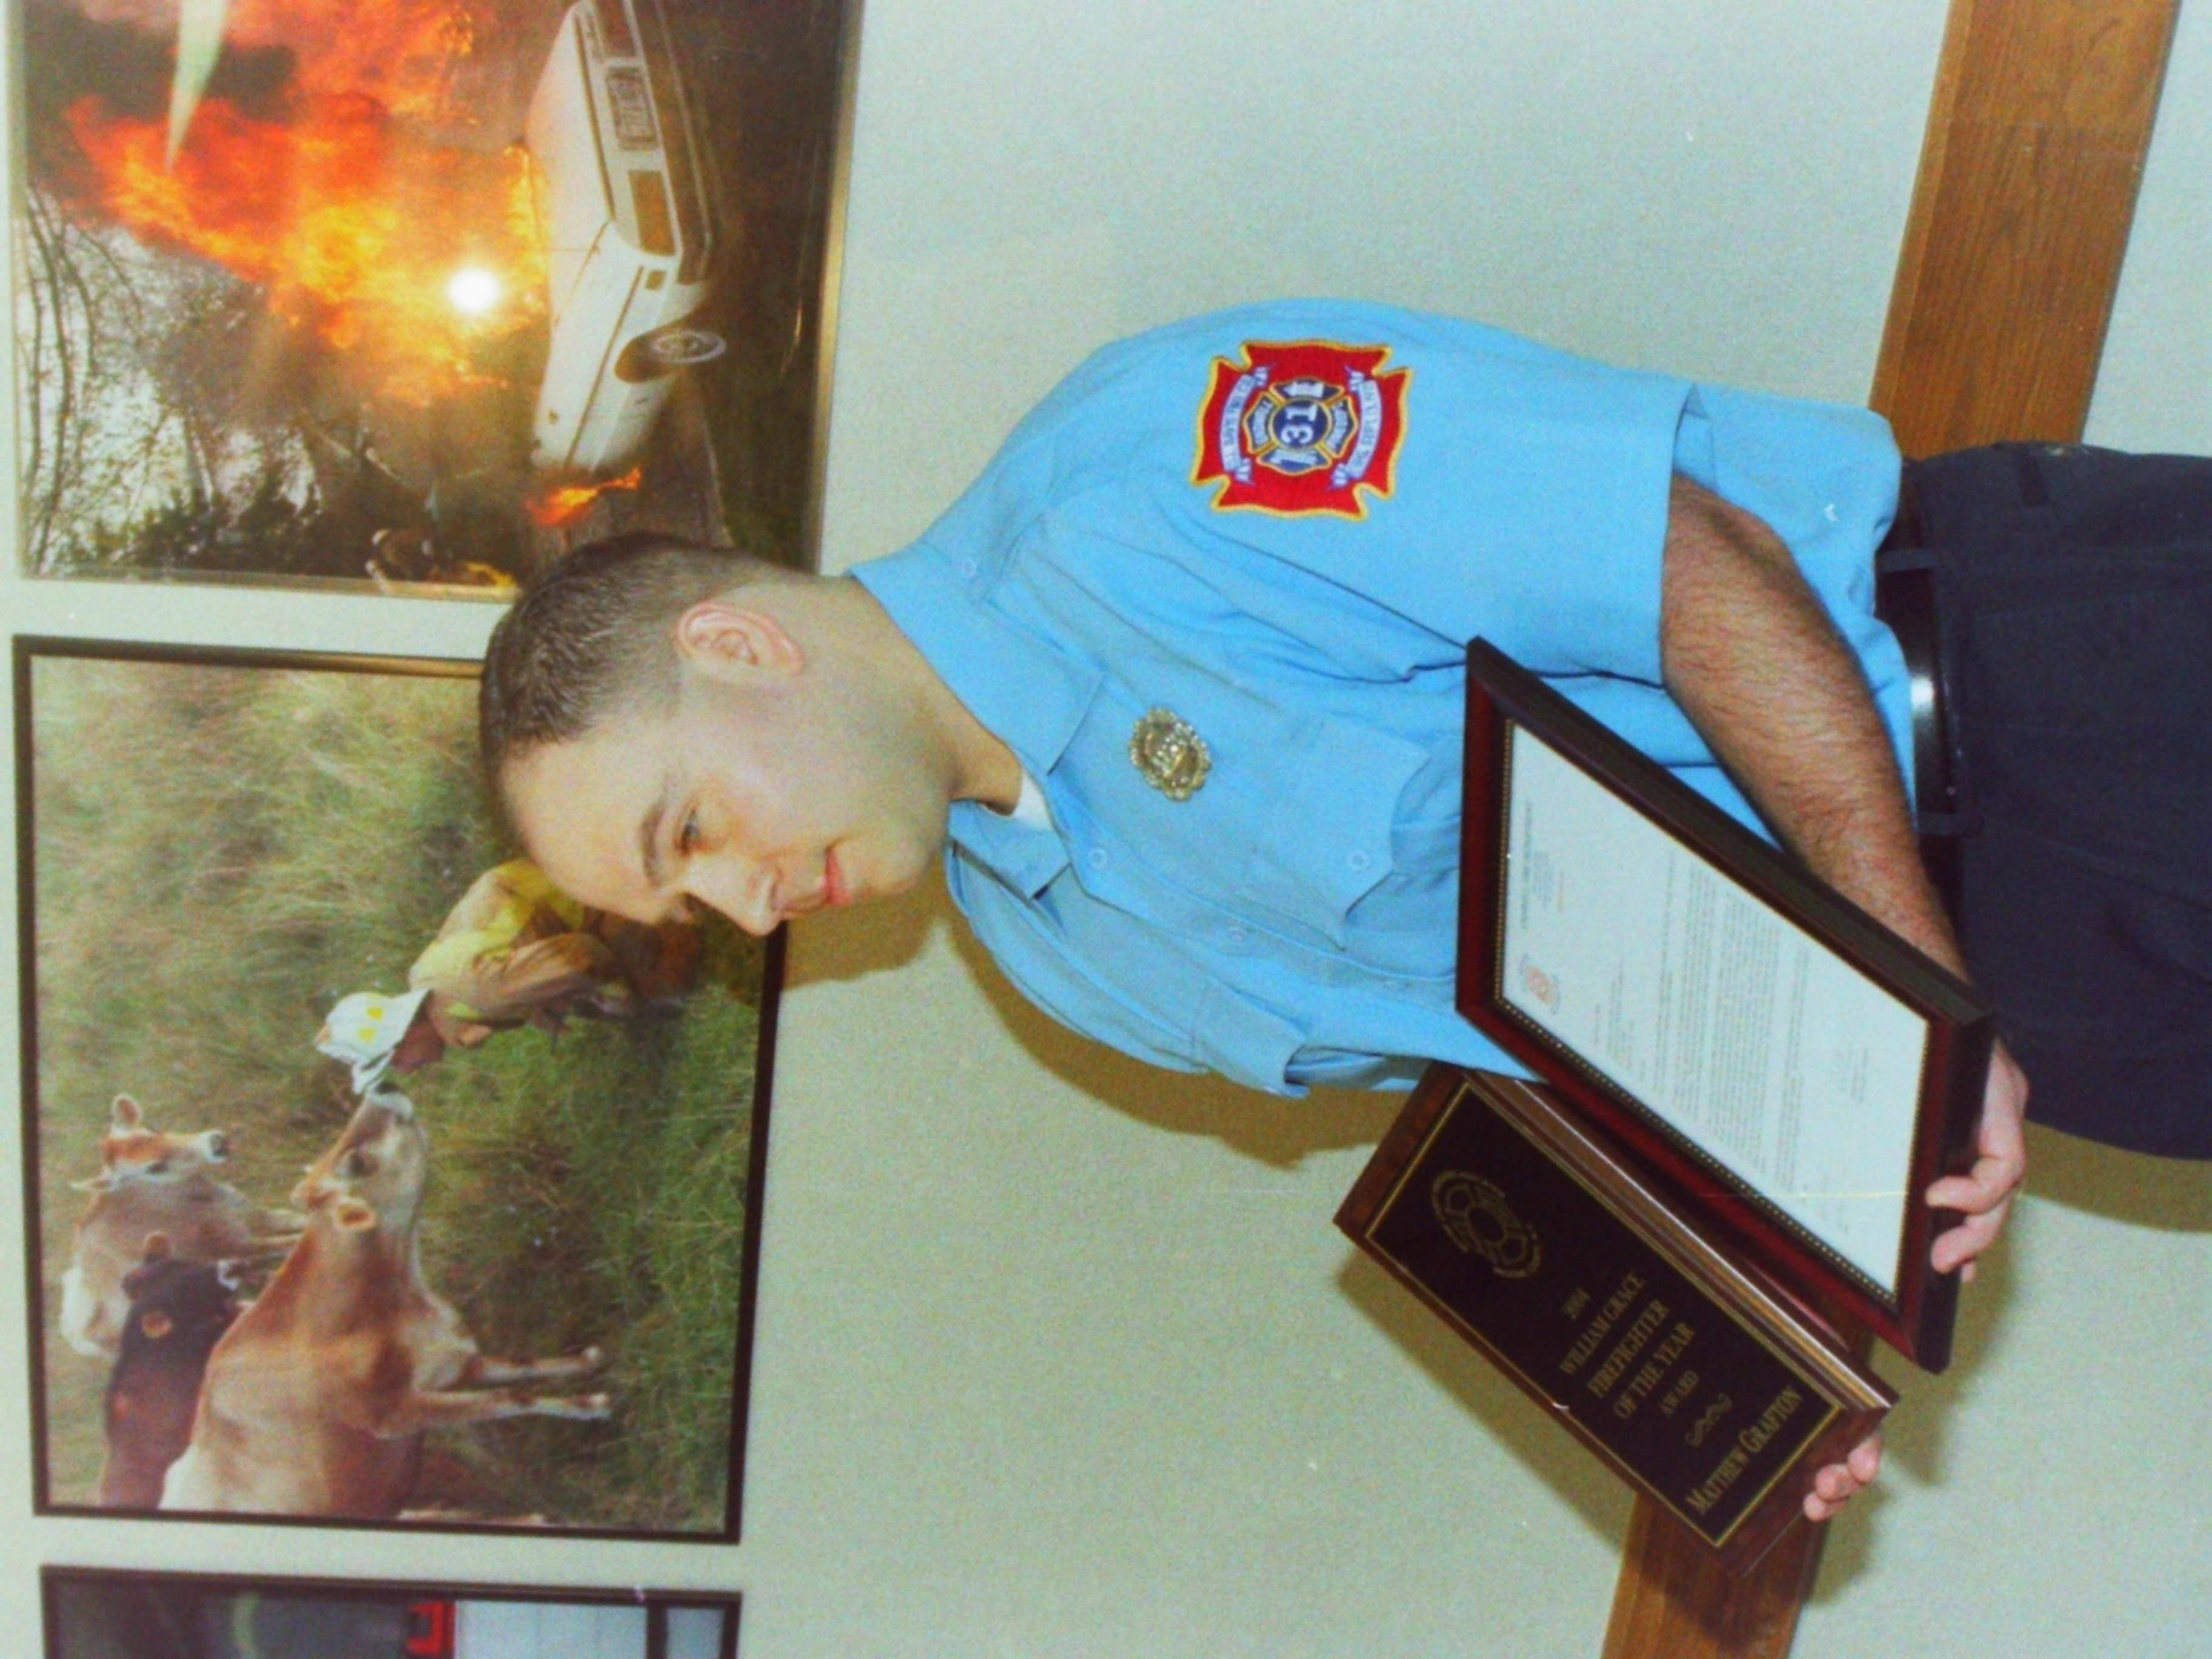 02-04-05  Other - Firefighter Of The Year (Grafton)